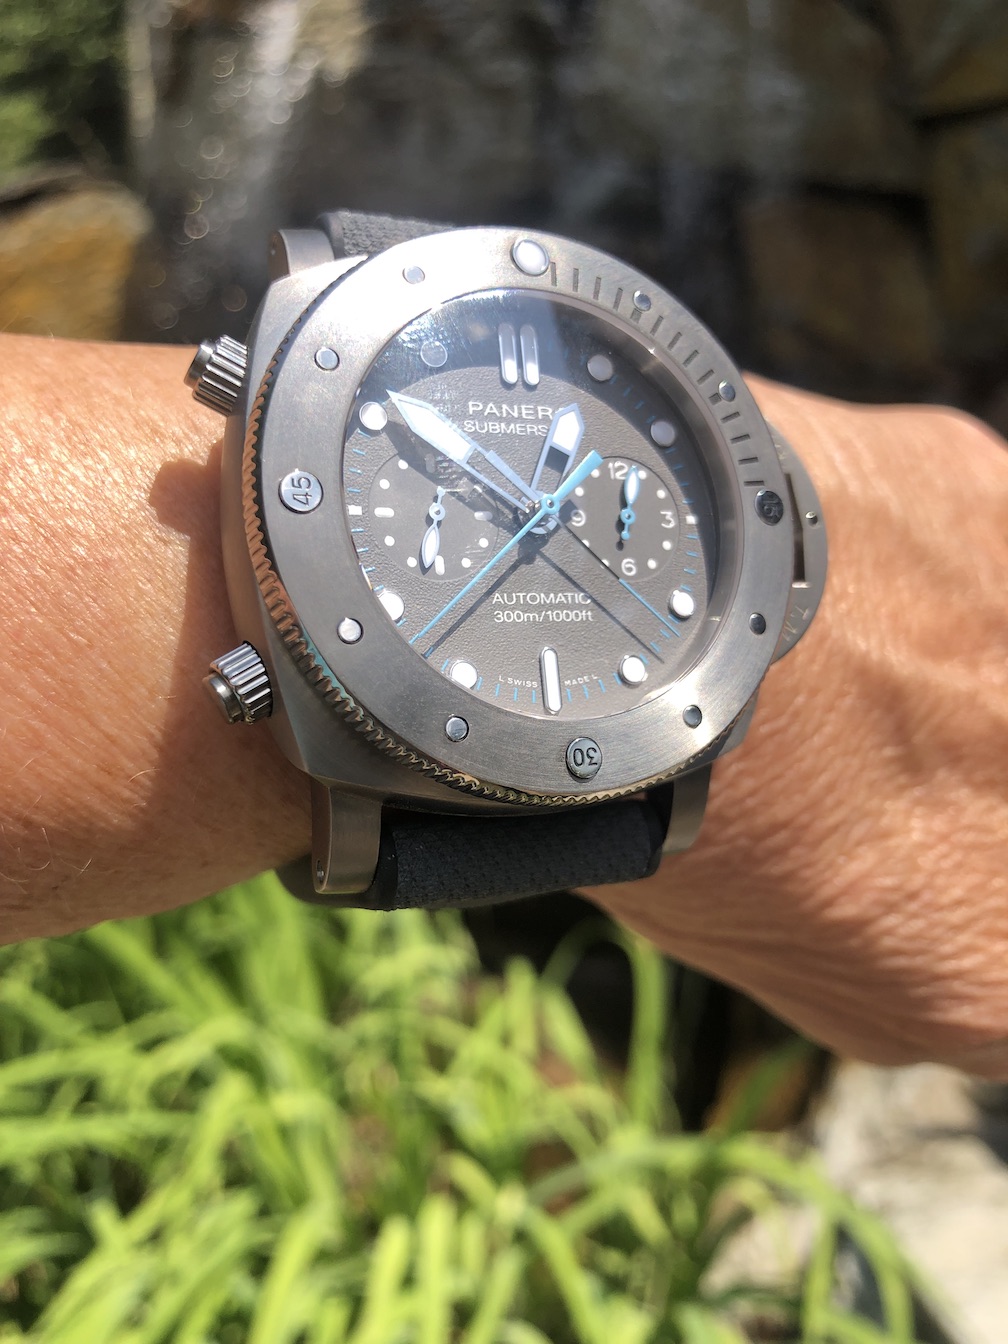 Panerai Submersible Chrono Flyback watch created in collaboration with Jimmy Chin 